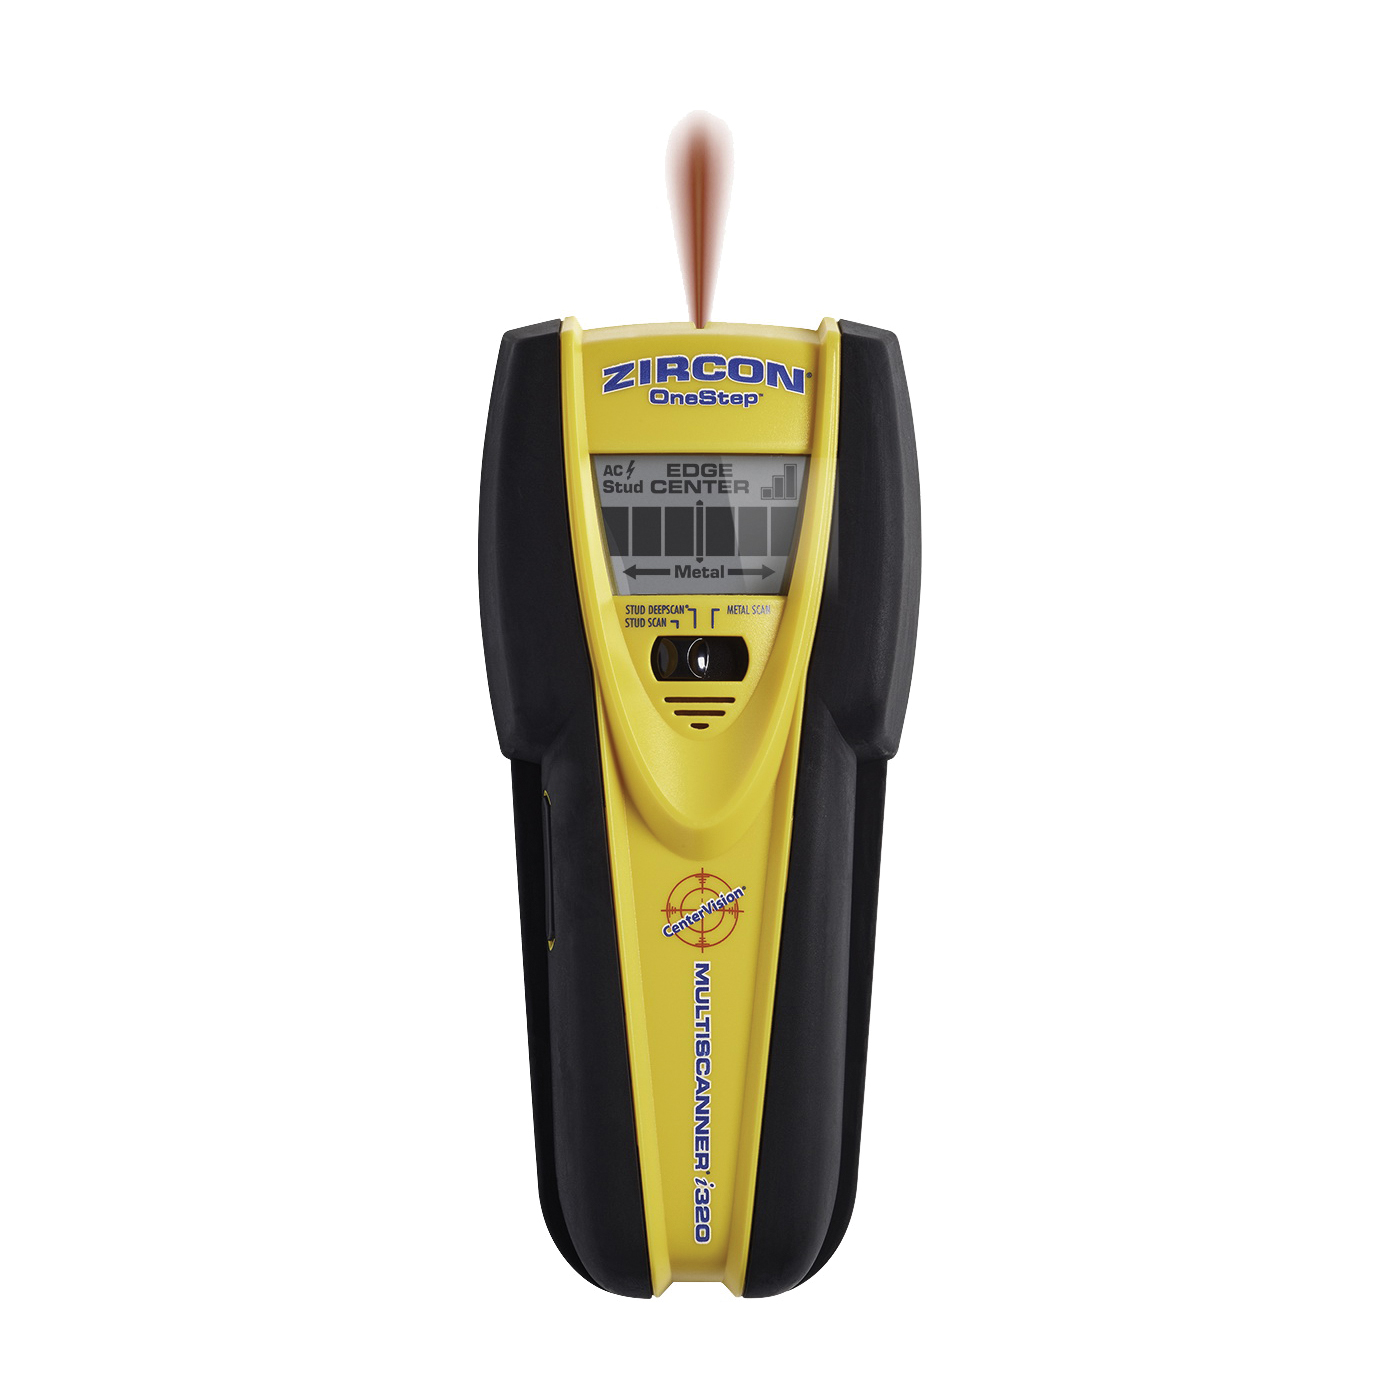 Zircon 63415 Multiscanner OneStep i320, 9 V Battery, 3/4 to 3 in Detection, Detectable Material: Metal/Wood - 1